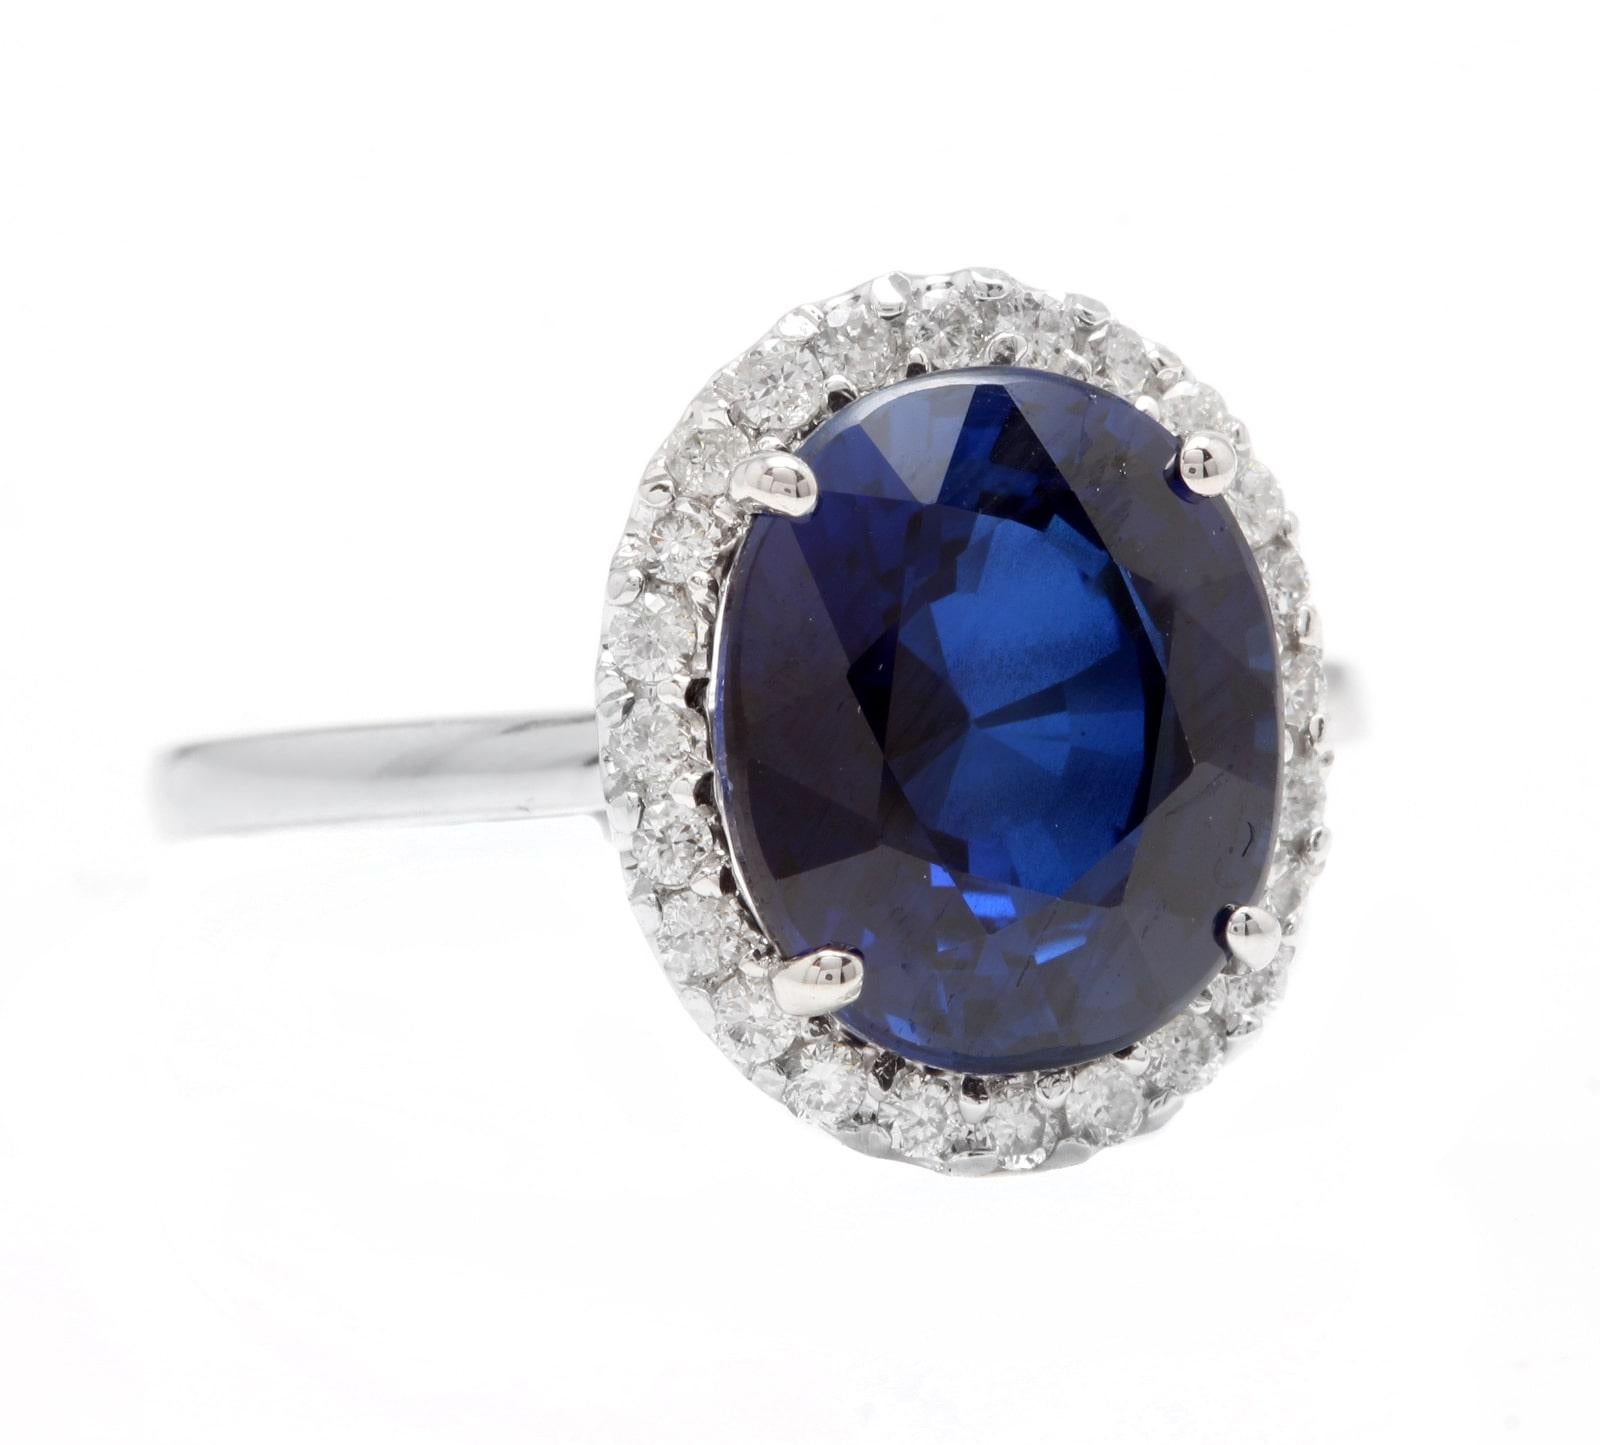 6.35 Carats Lab Ceylon Blue Sapphire and Natural Diamond 14K Solid White Gold Ring

Suggested Replacement Value $4,000.00

Metal: 14K Solid White Gold (Stamped)

Total Lab Created Blue Sapphire Weight is: Approx. 6.00 Carats 

Sapphire Measures: